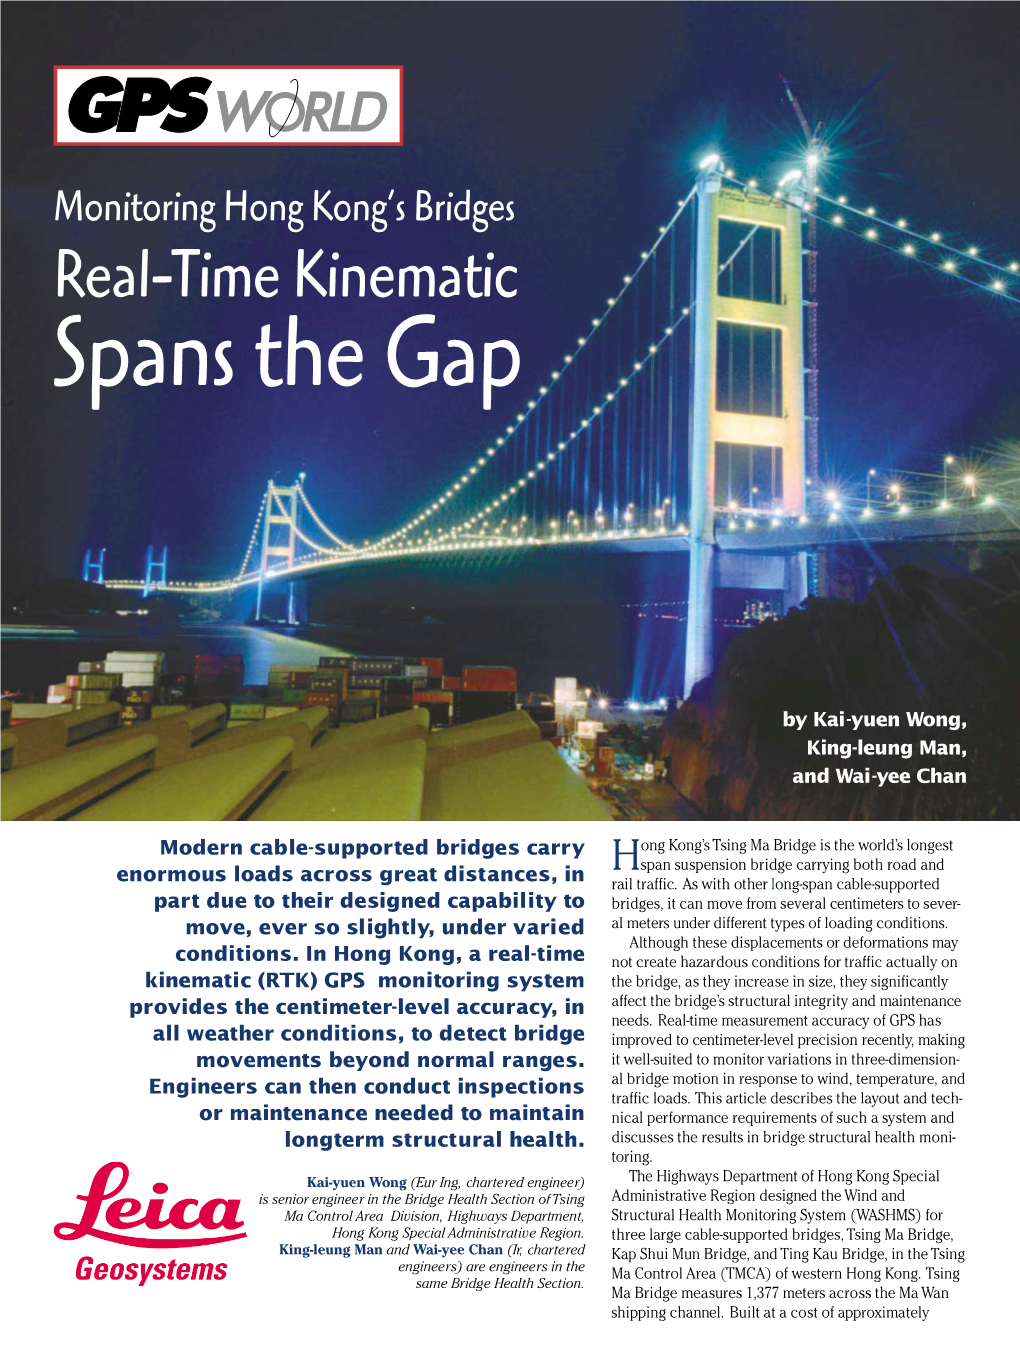 Real-Time Kinematic Spans the Gap